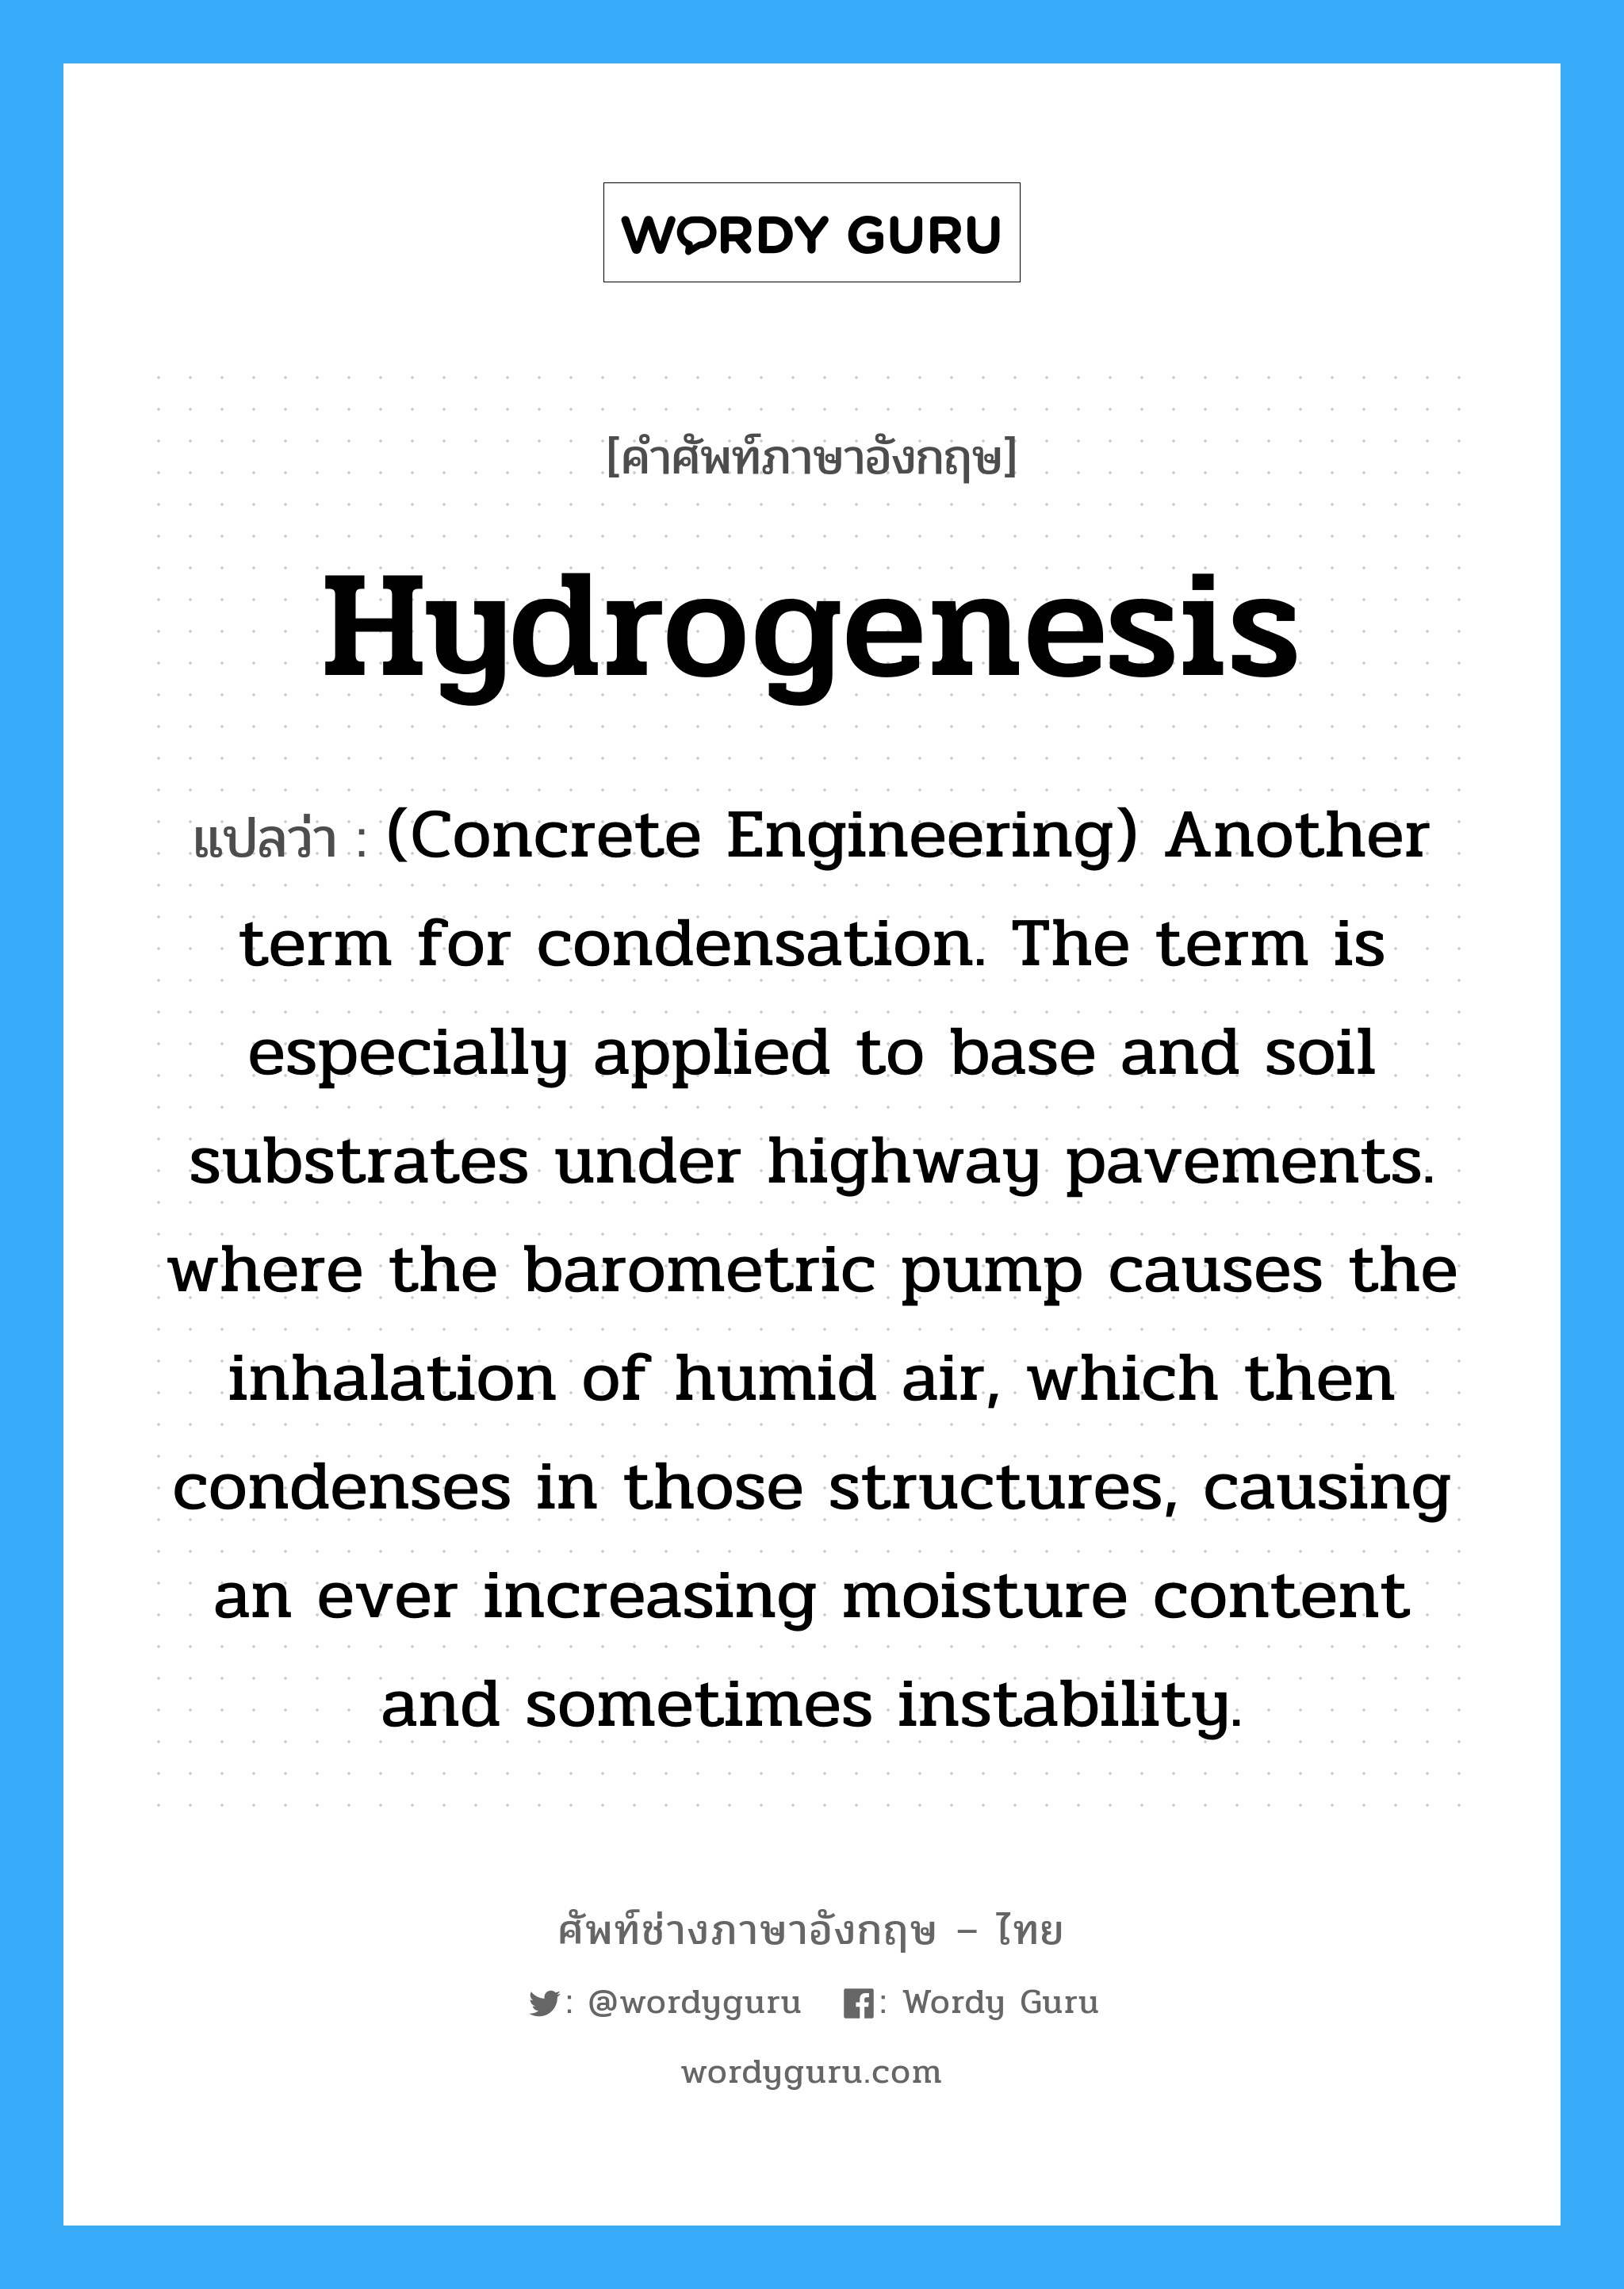 (Concrete Engineering) Another term for condensation. The term is especially applied to base and soil substrates under highway pavements. where the barometric pump causes the inhalation of humid air, which then condenses in those structures, causing an ever increasing moisture content and sometimes instability. ภาษาอังกฤษ?, คำศัพท์ช่างภาษาอังกฤษ - ไทย (Concrete Engineering) Another term for condensation. The term is especially applied to base and soil substrates under highway pavements. where the barometric pump causes the inhalation of humid air, which then condenses in those structures, causing an ever increasing moisture content and sometimes instability. คำศัพท์ภาษาอังกฤษ (Concrete Engineering) Another term for condensation. The term is especially applied to base and soil substrates under highway pavements. where the barometric pump causes the inhalation of humid air, which then condenses in those structures, causing an ever increasing moisture content and sometimes instability. แปลว่า Hydrogenesis